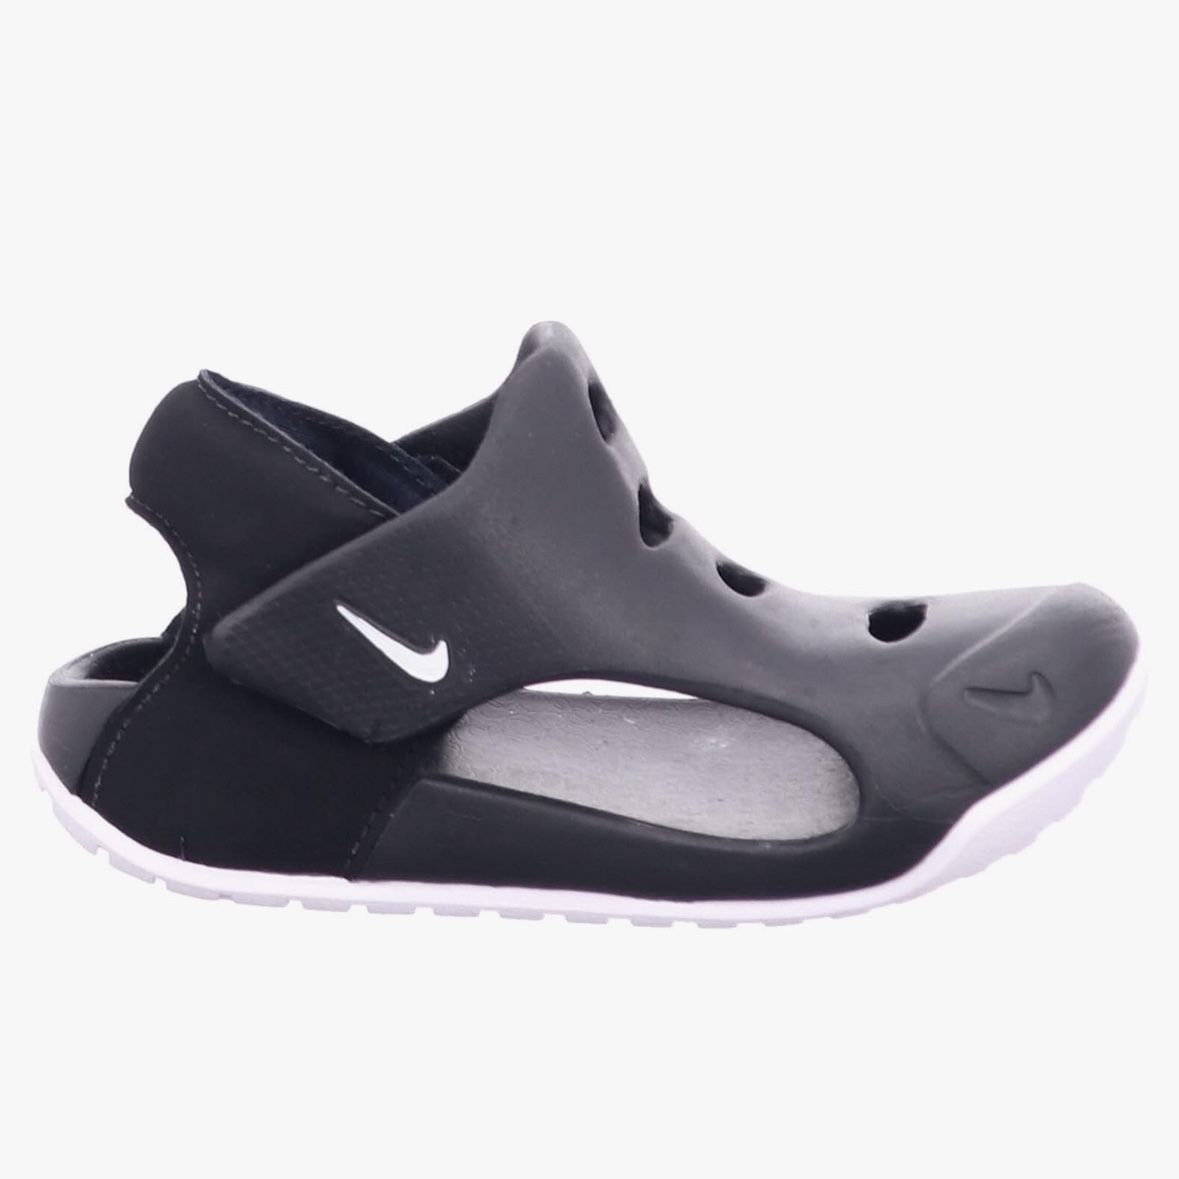 Nike Kids' Sunray Protect (Infant/Toddler)all Sizes 